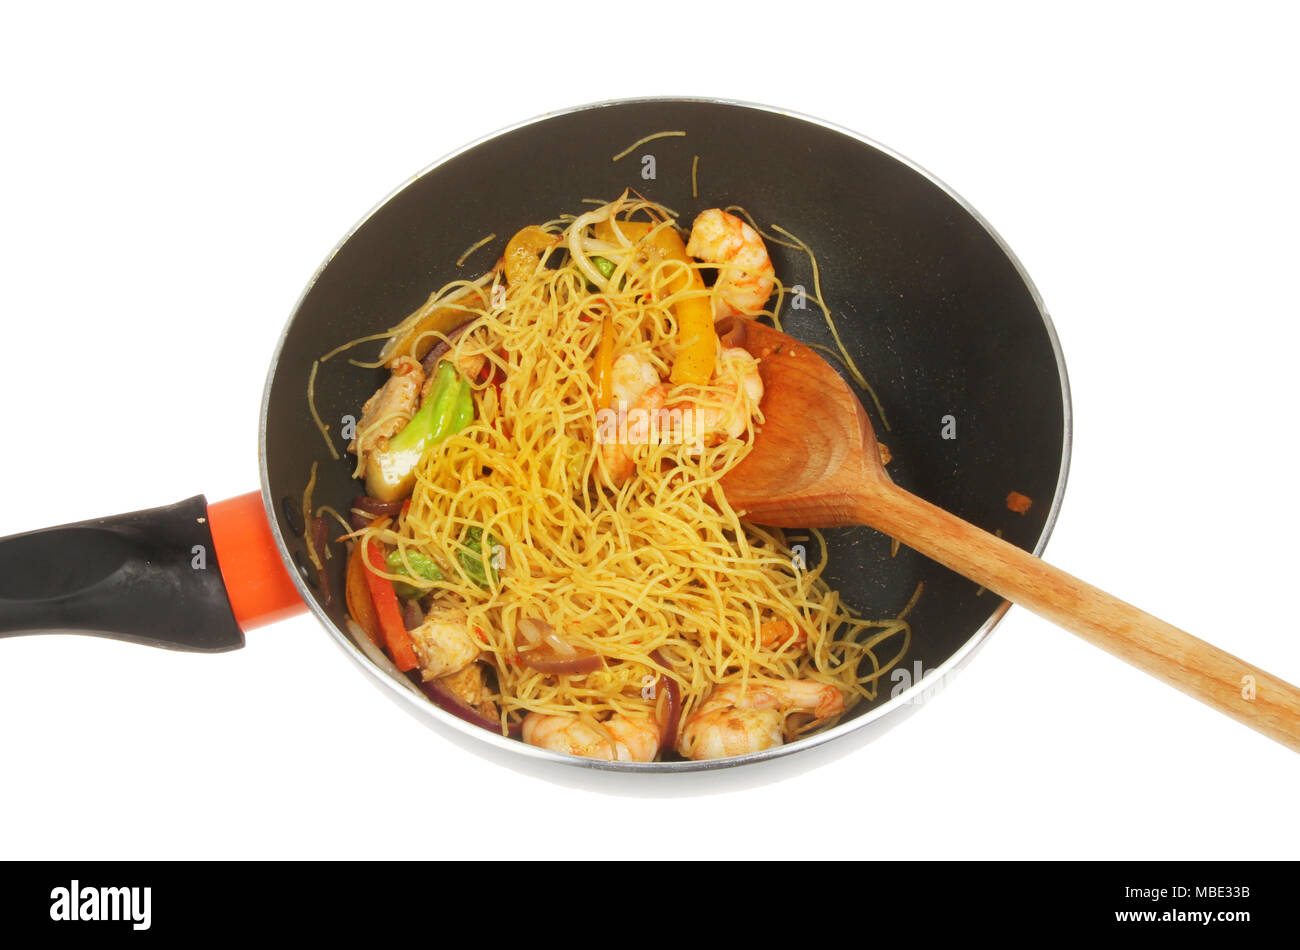 Noodle, chicken and prawn stir fry in a wok with a wooden spoon isolated against white Stock Photo